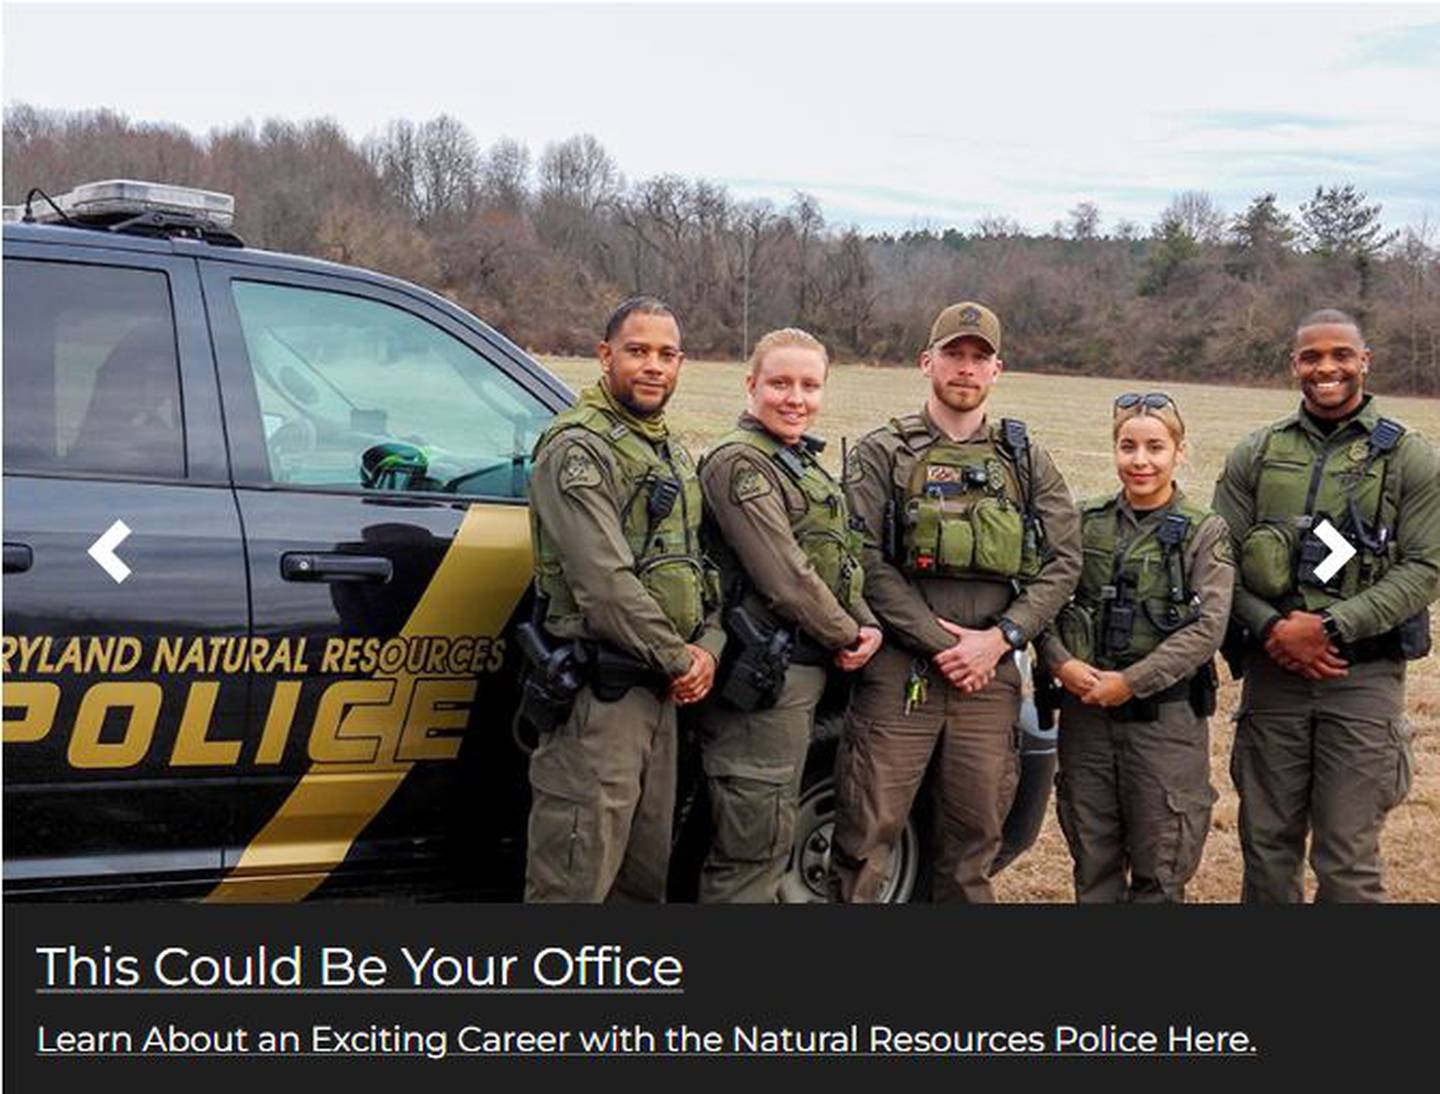 The Maryland Natural Resources Police seek job applicants in an ad on their website.